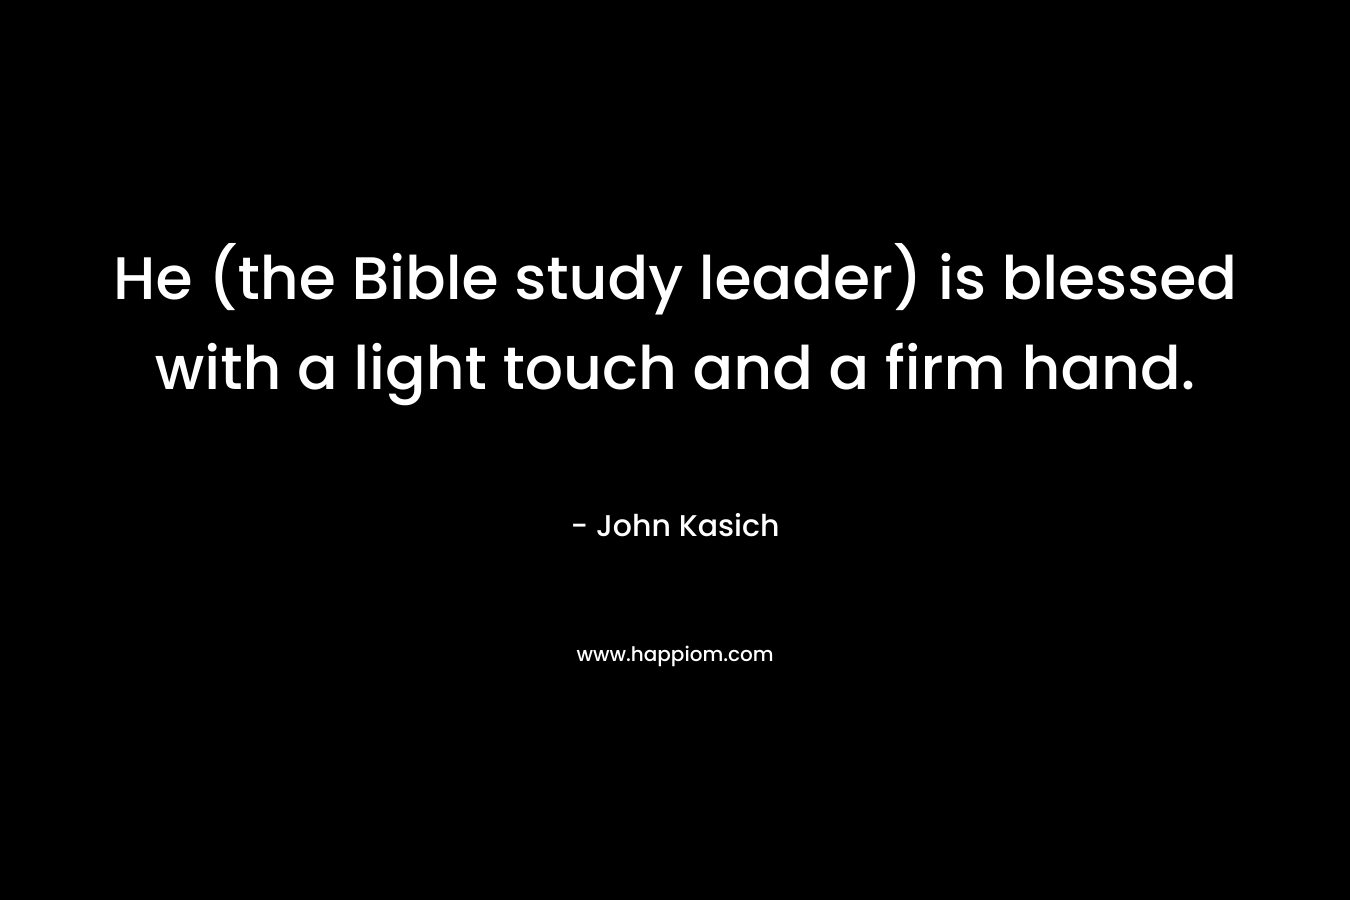 He (the Bible study leader) is blessed with a light touch and a firm hand. – John Kasich